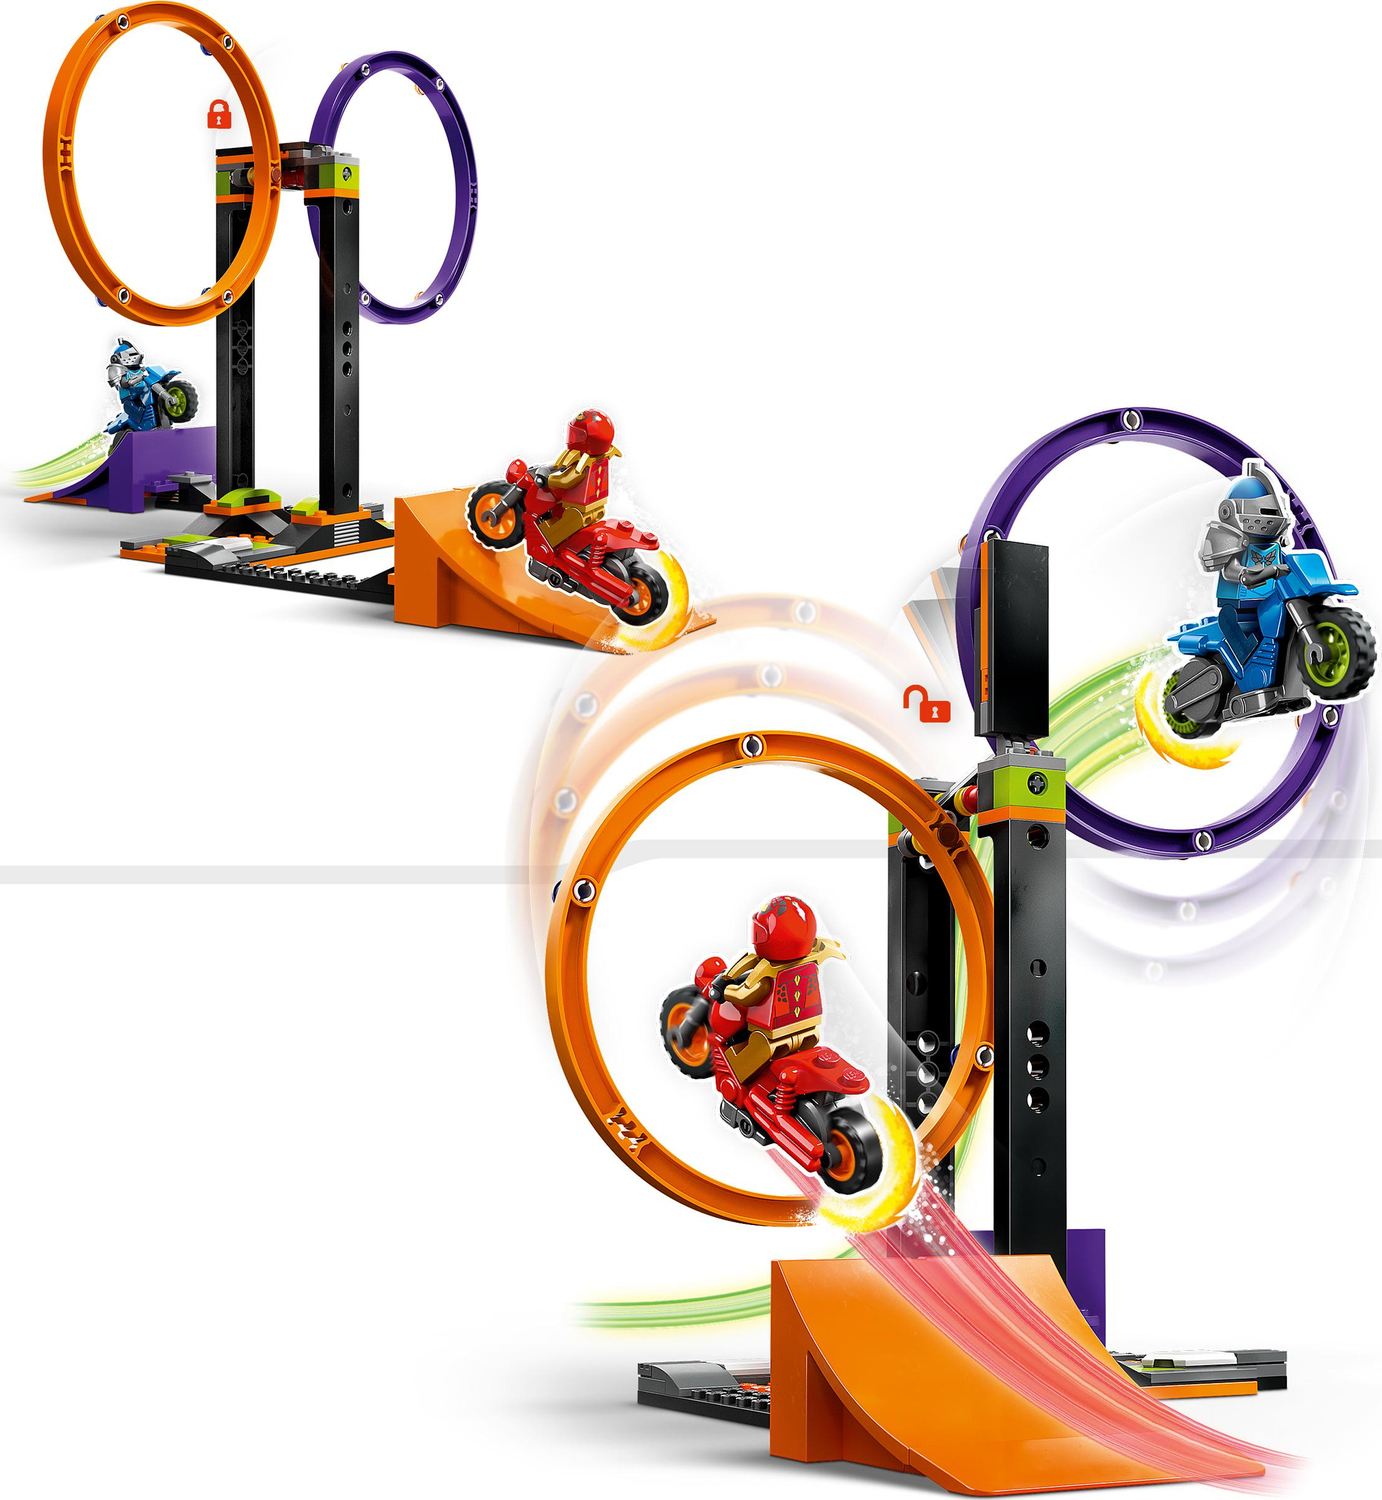 LEGO City Stuntz Spinning Stunt Challenge 60360 - 1 or 2 Player Tournaments  with Flywheel-Powered Motorcycle Toys, Features 2 Minifigures and Ramps,  Fun Gift Set Idea for Boys, Girls, or Kids Ages 6+ 